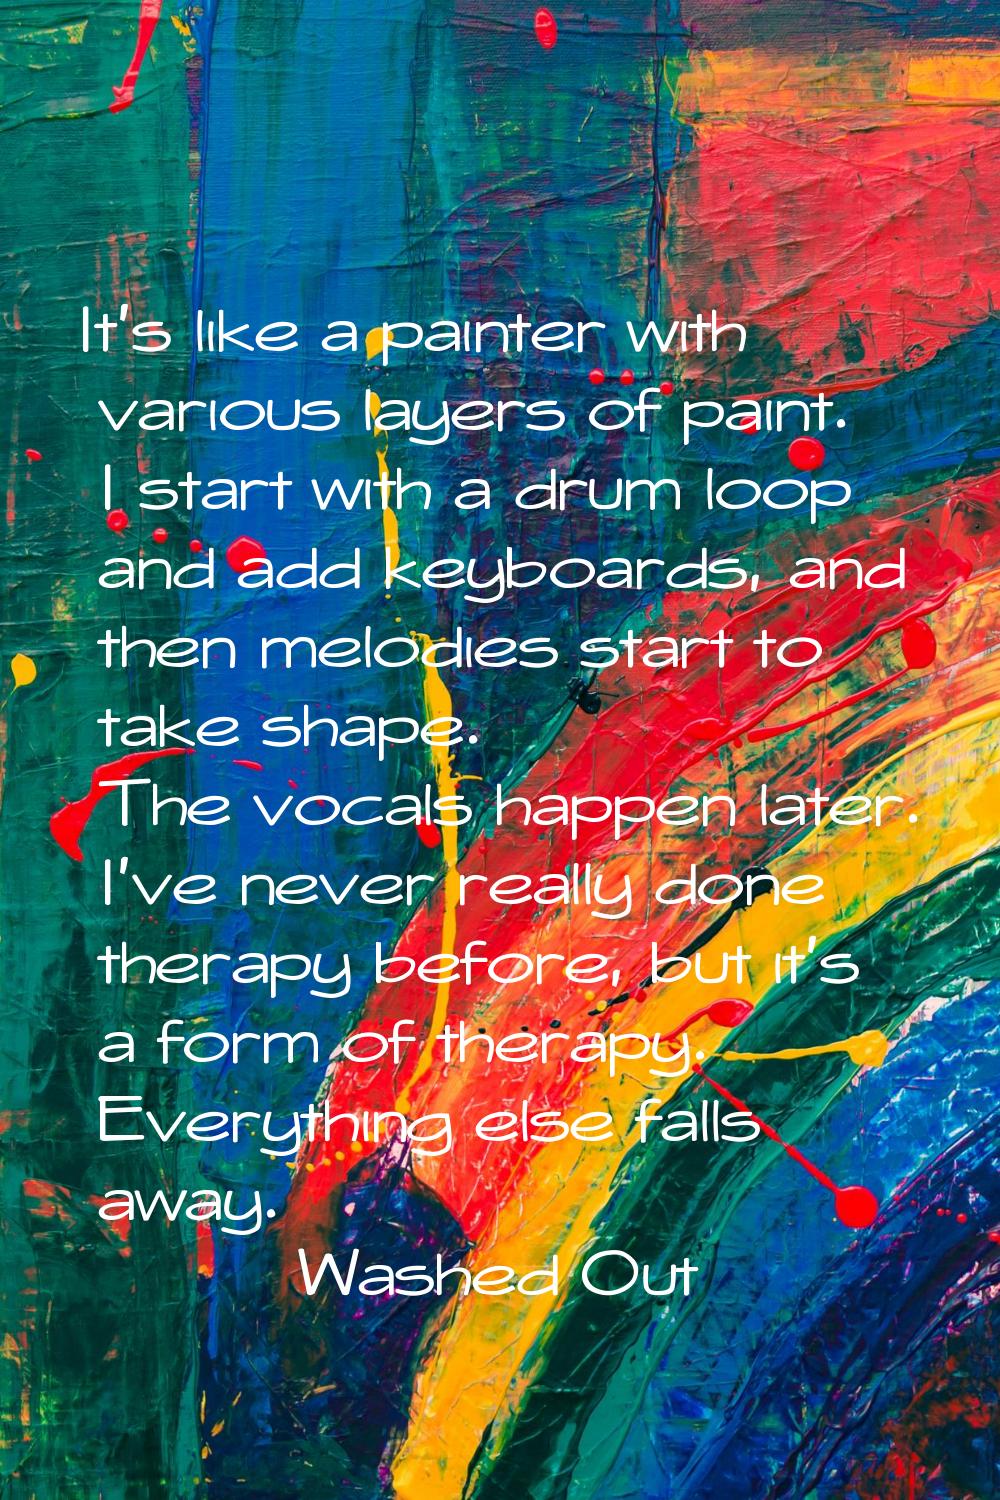 It's like a painter with various layers of paint. I start with a drum loop and add keyboards, and t